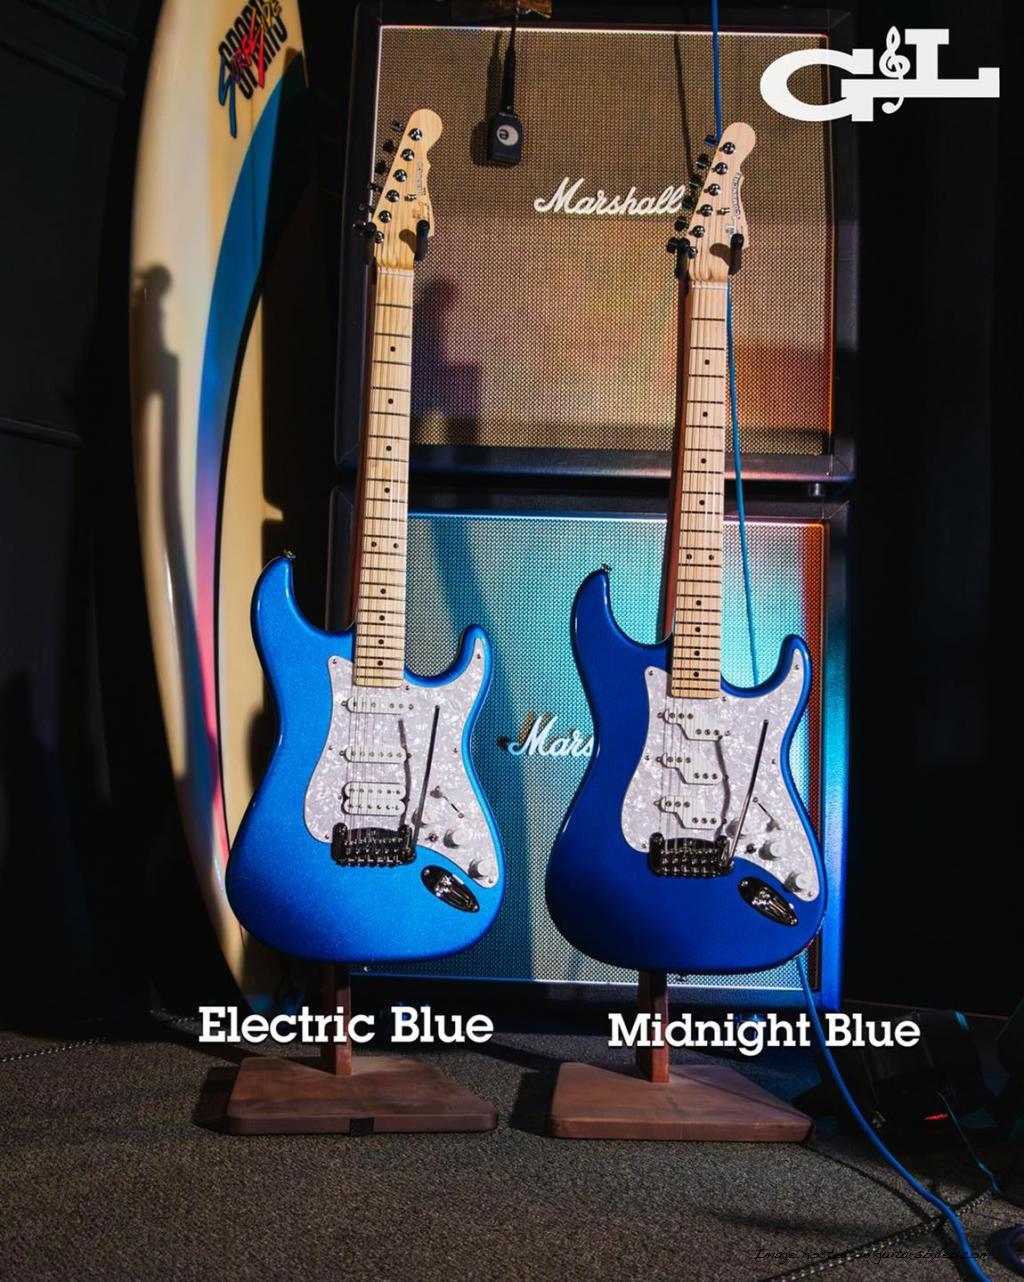 Electric Blue and Midnight Blue are back